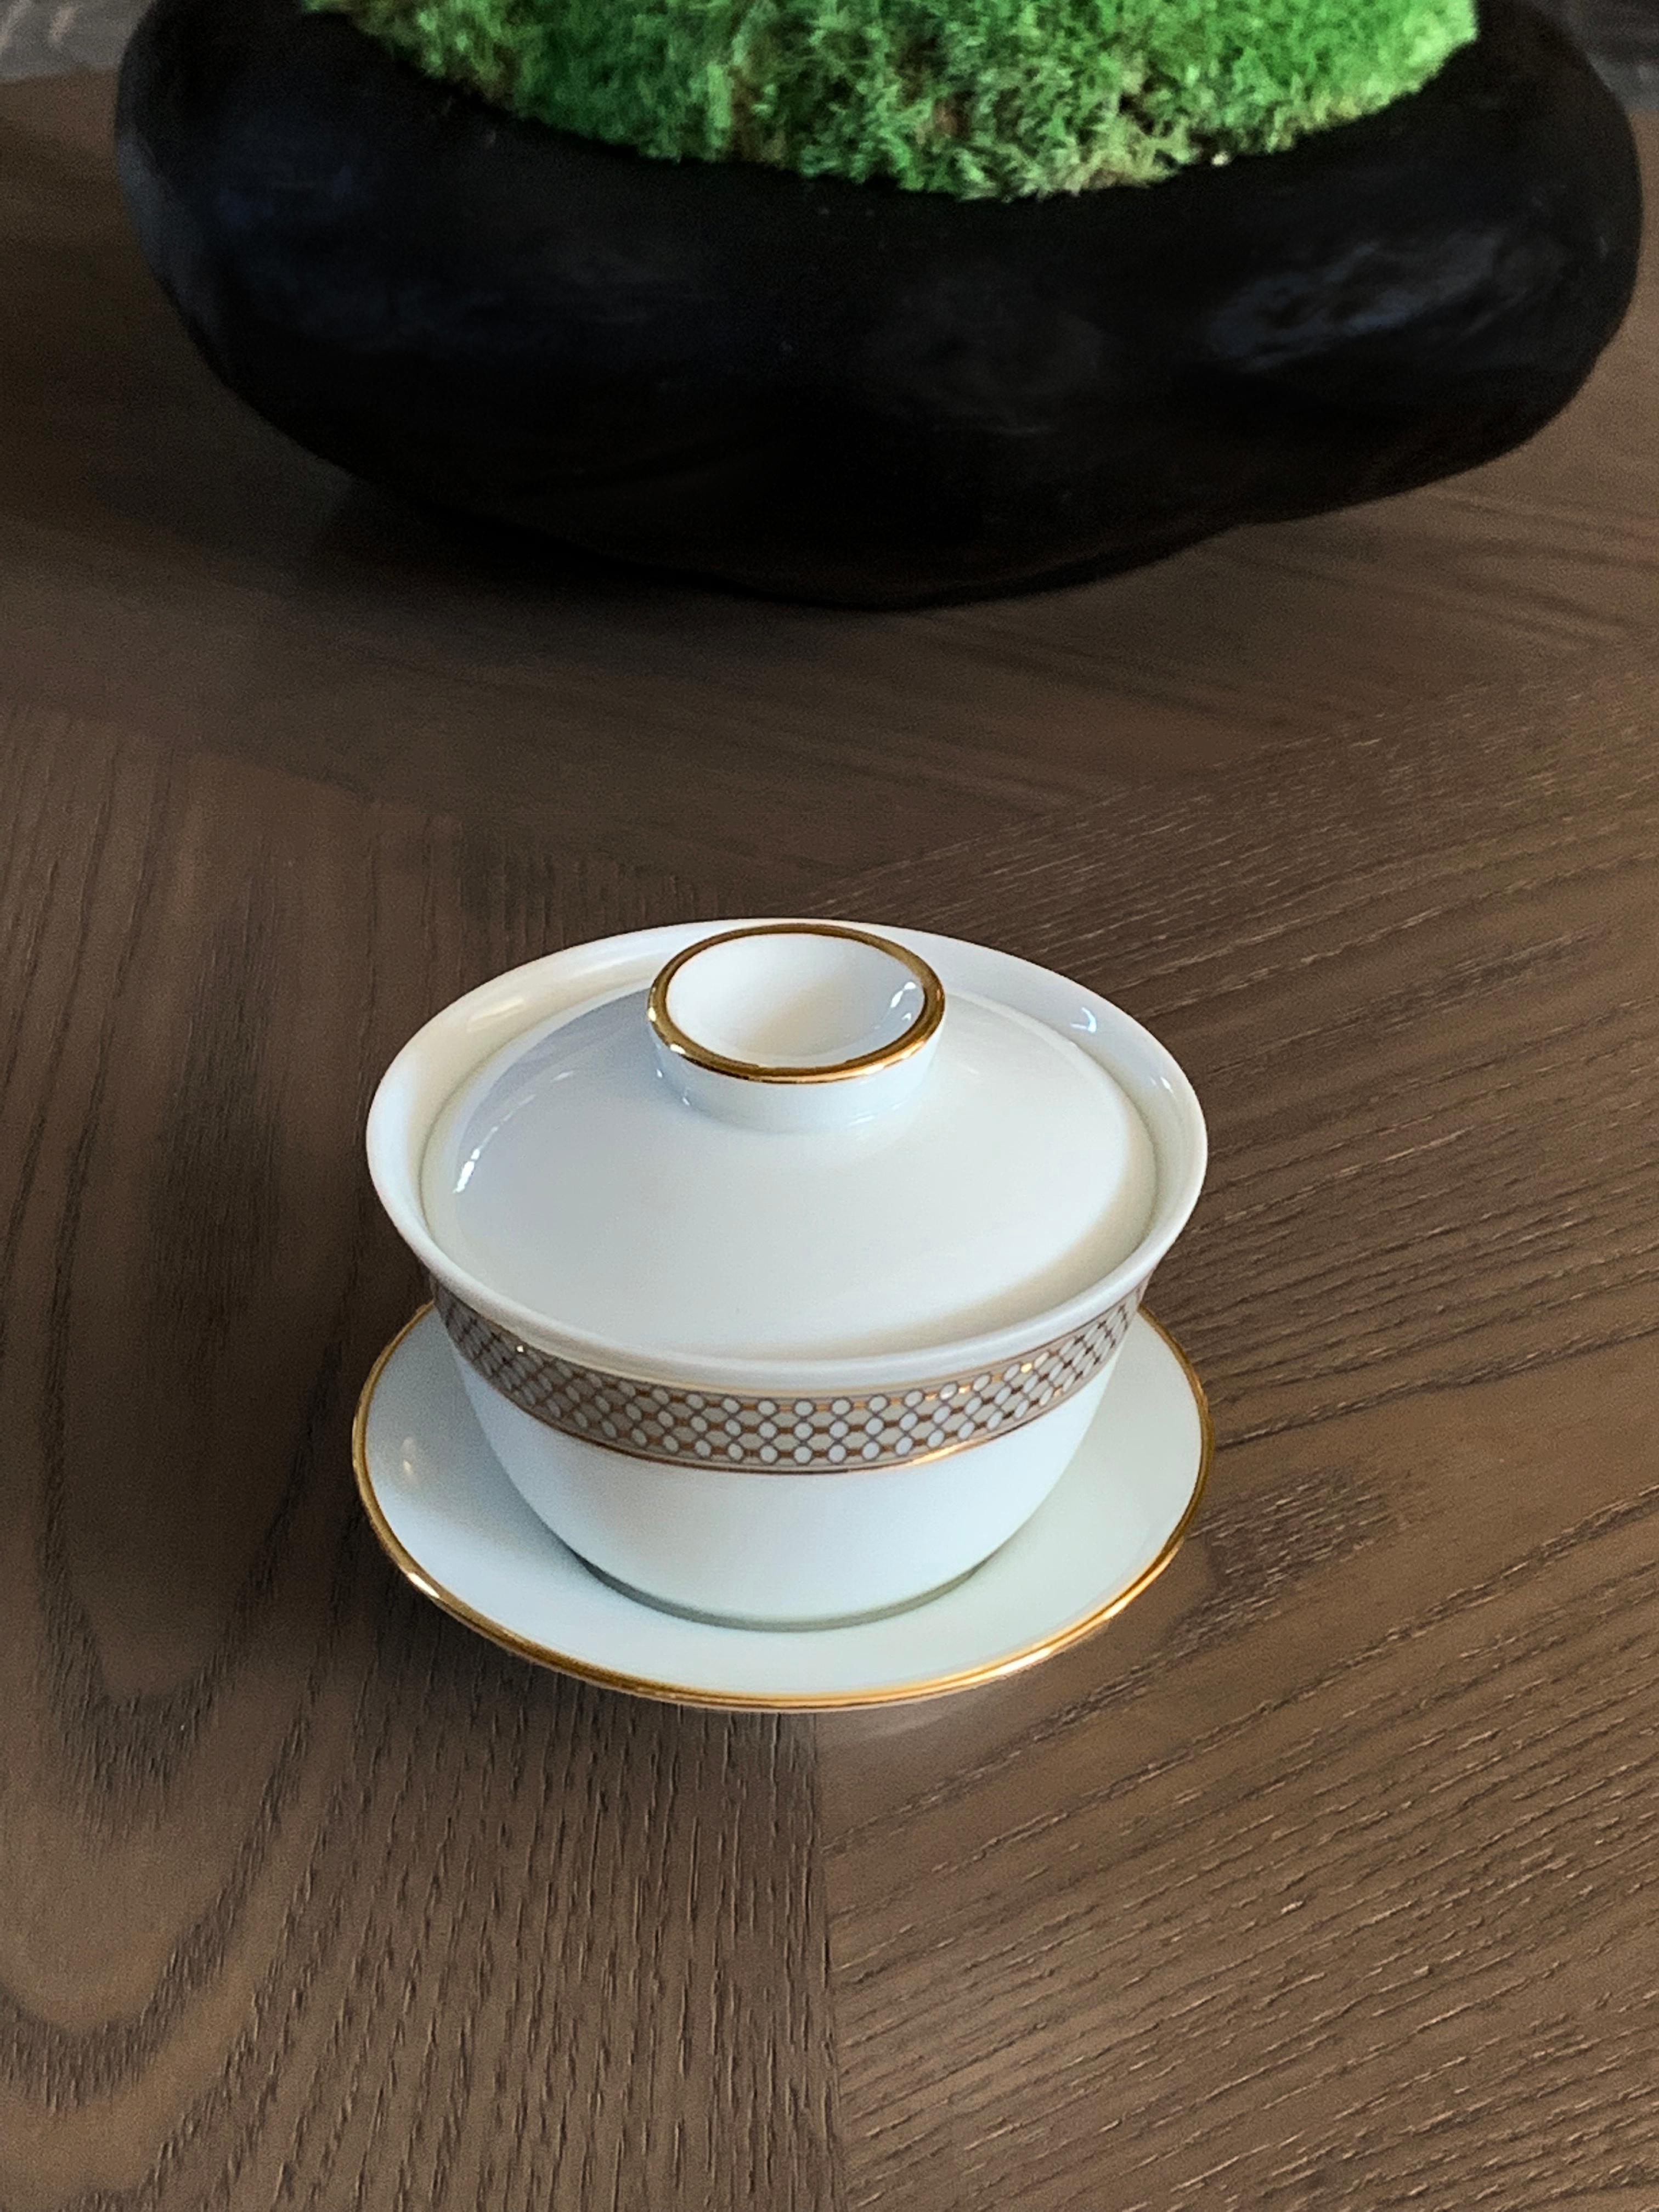 Description: Chinese tea cup gaiwan set (2 pieces)
Color: Beige and gold
Size: 11 Ø x 10 H cm, 225 ml
Material: Porcelain and gold
Collection: Modern Vintage

Larger quantities available upon request, with 8 weeks production time.